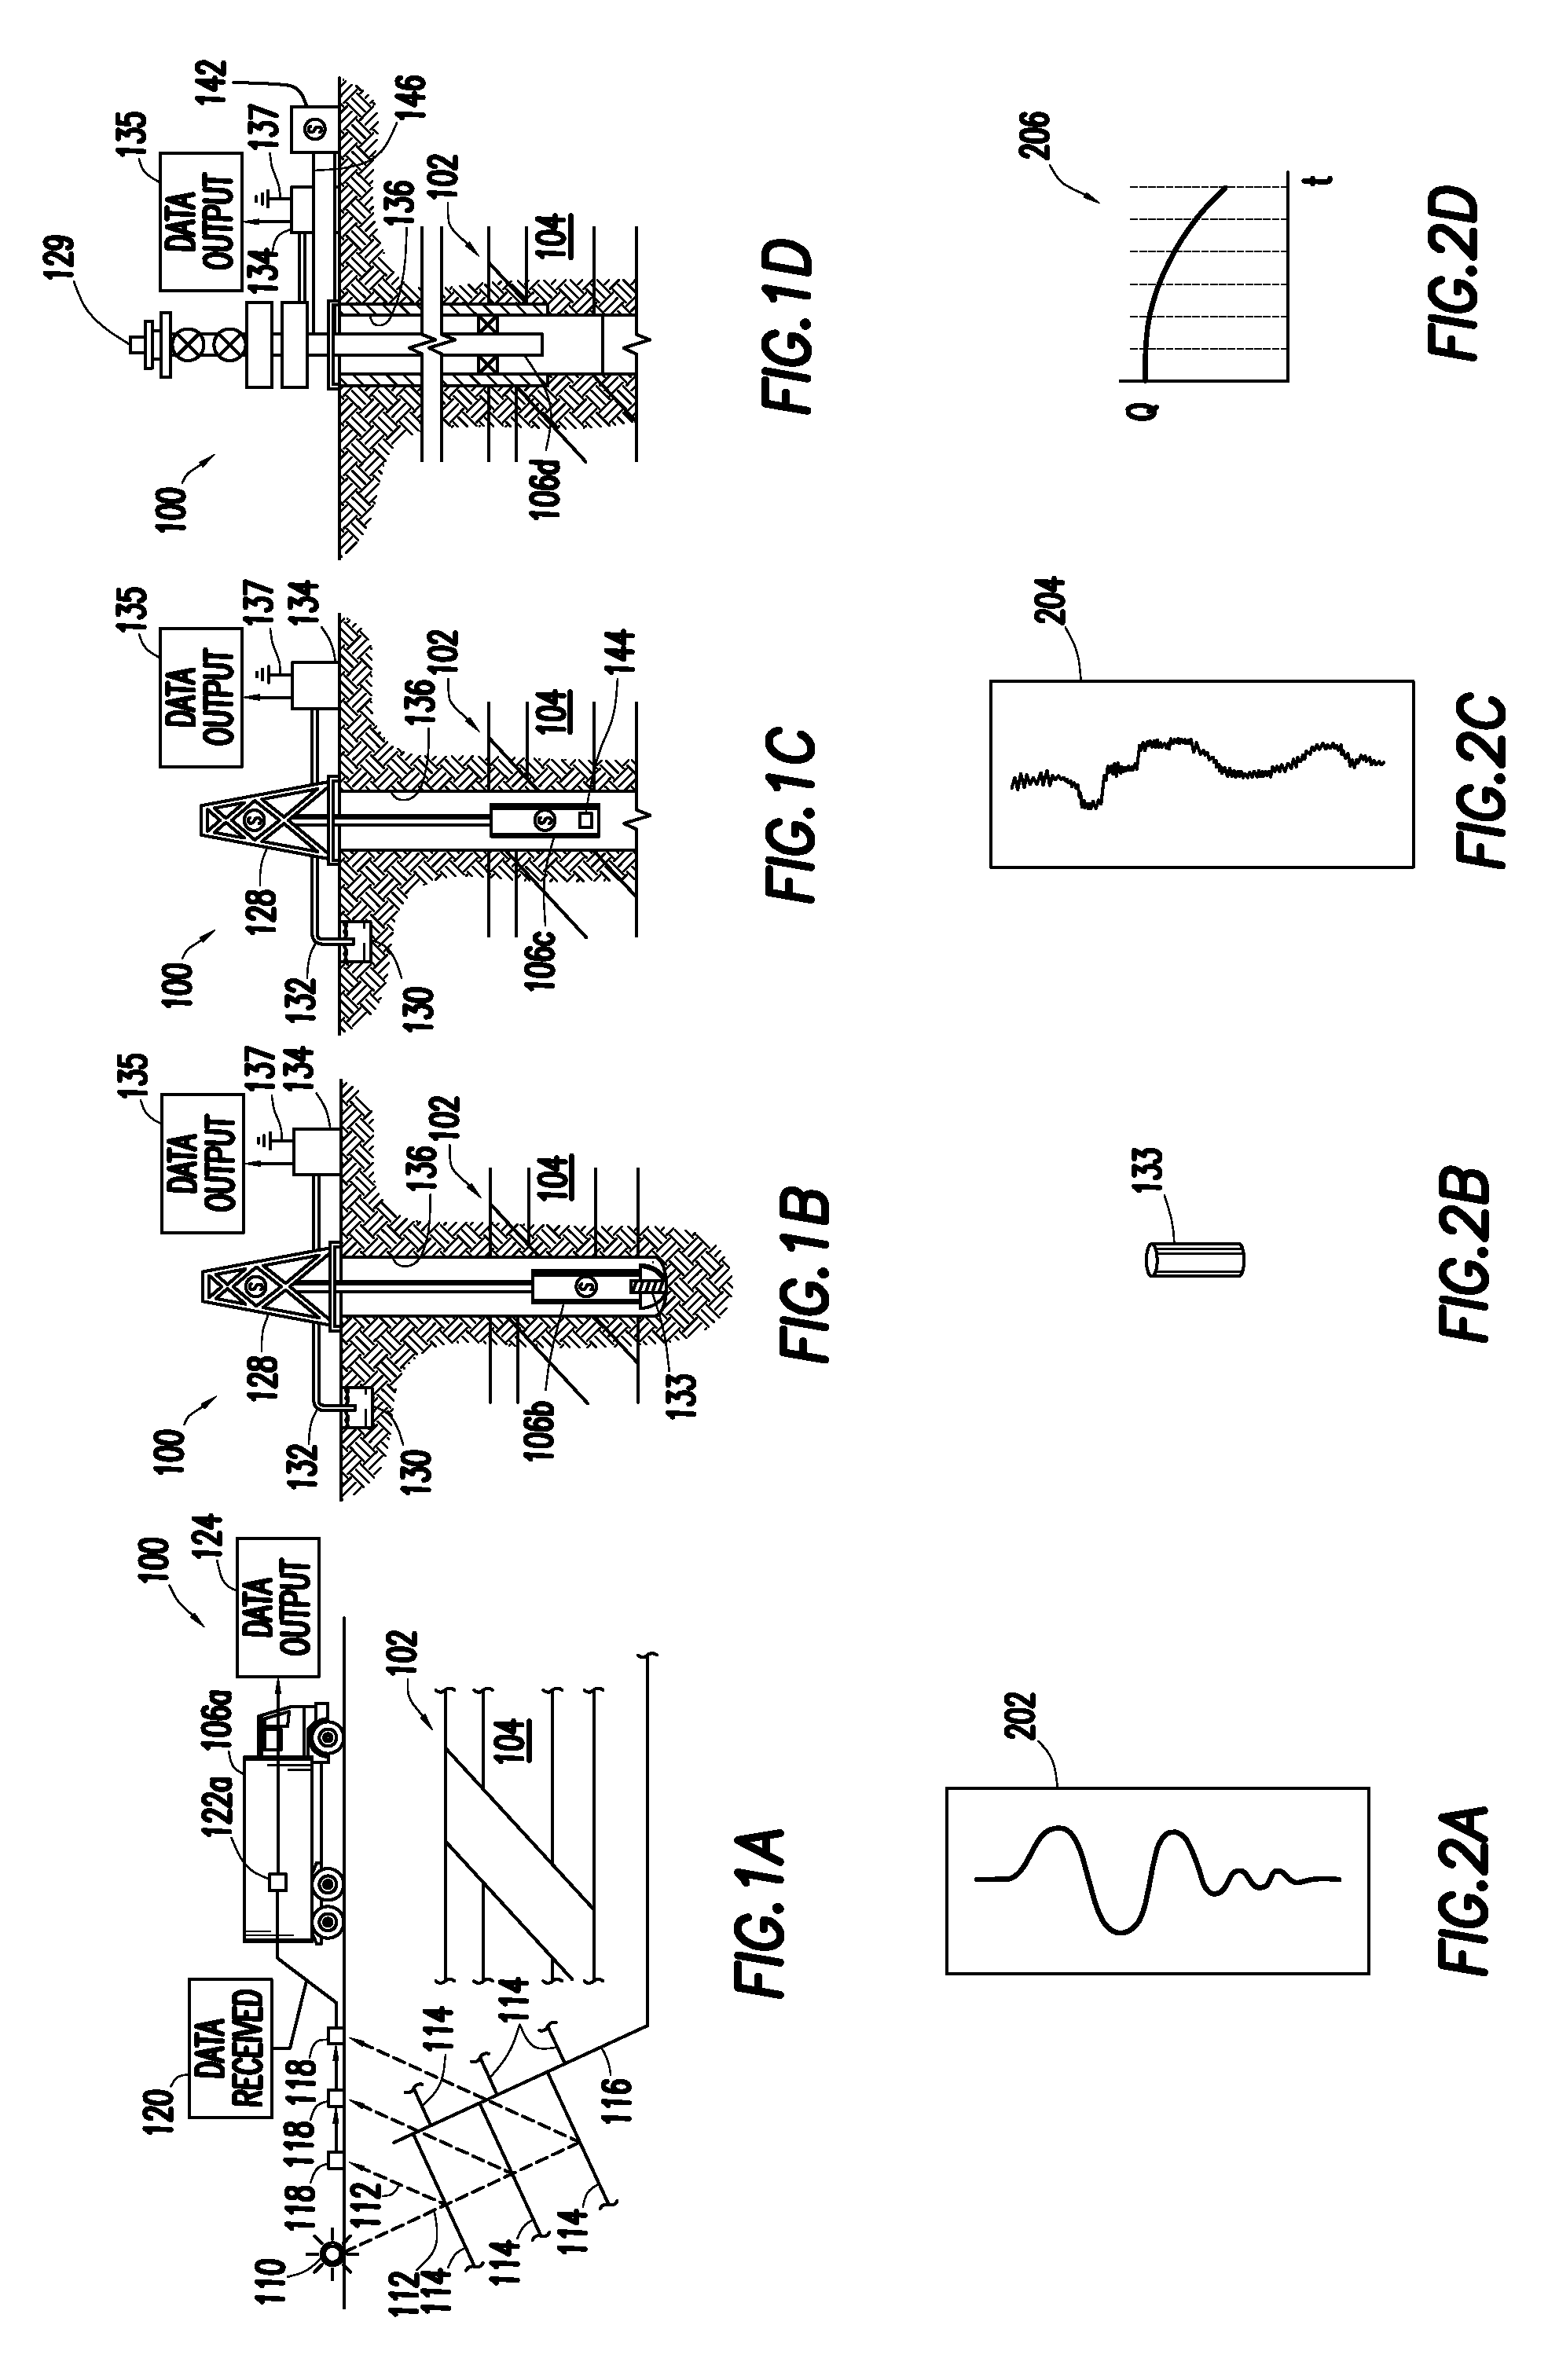 Method for managing production from a hydrocarbon producing reservoir in real-time